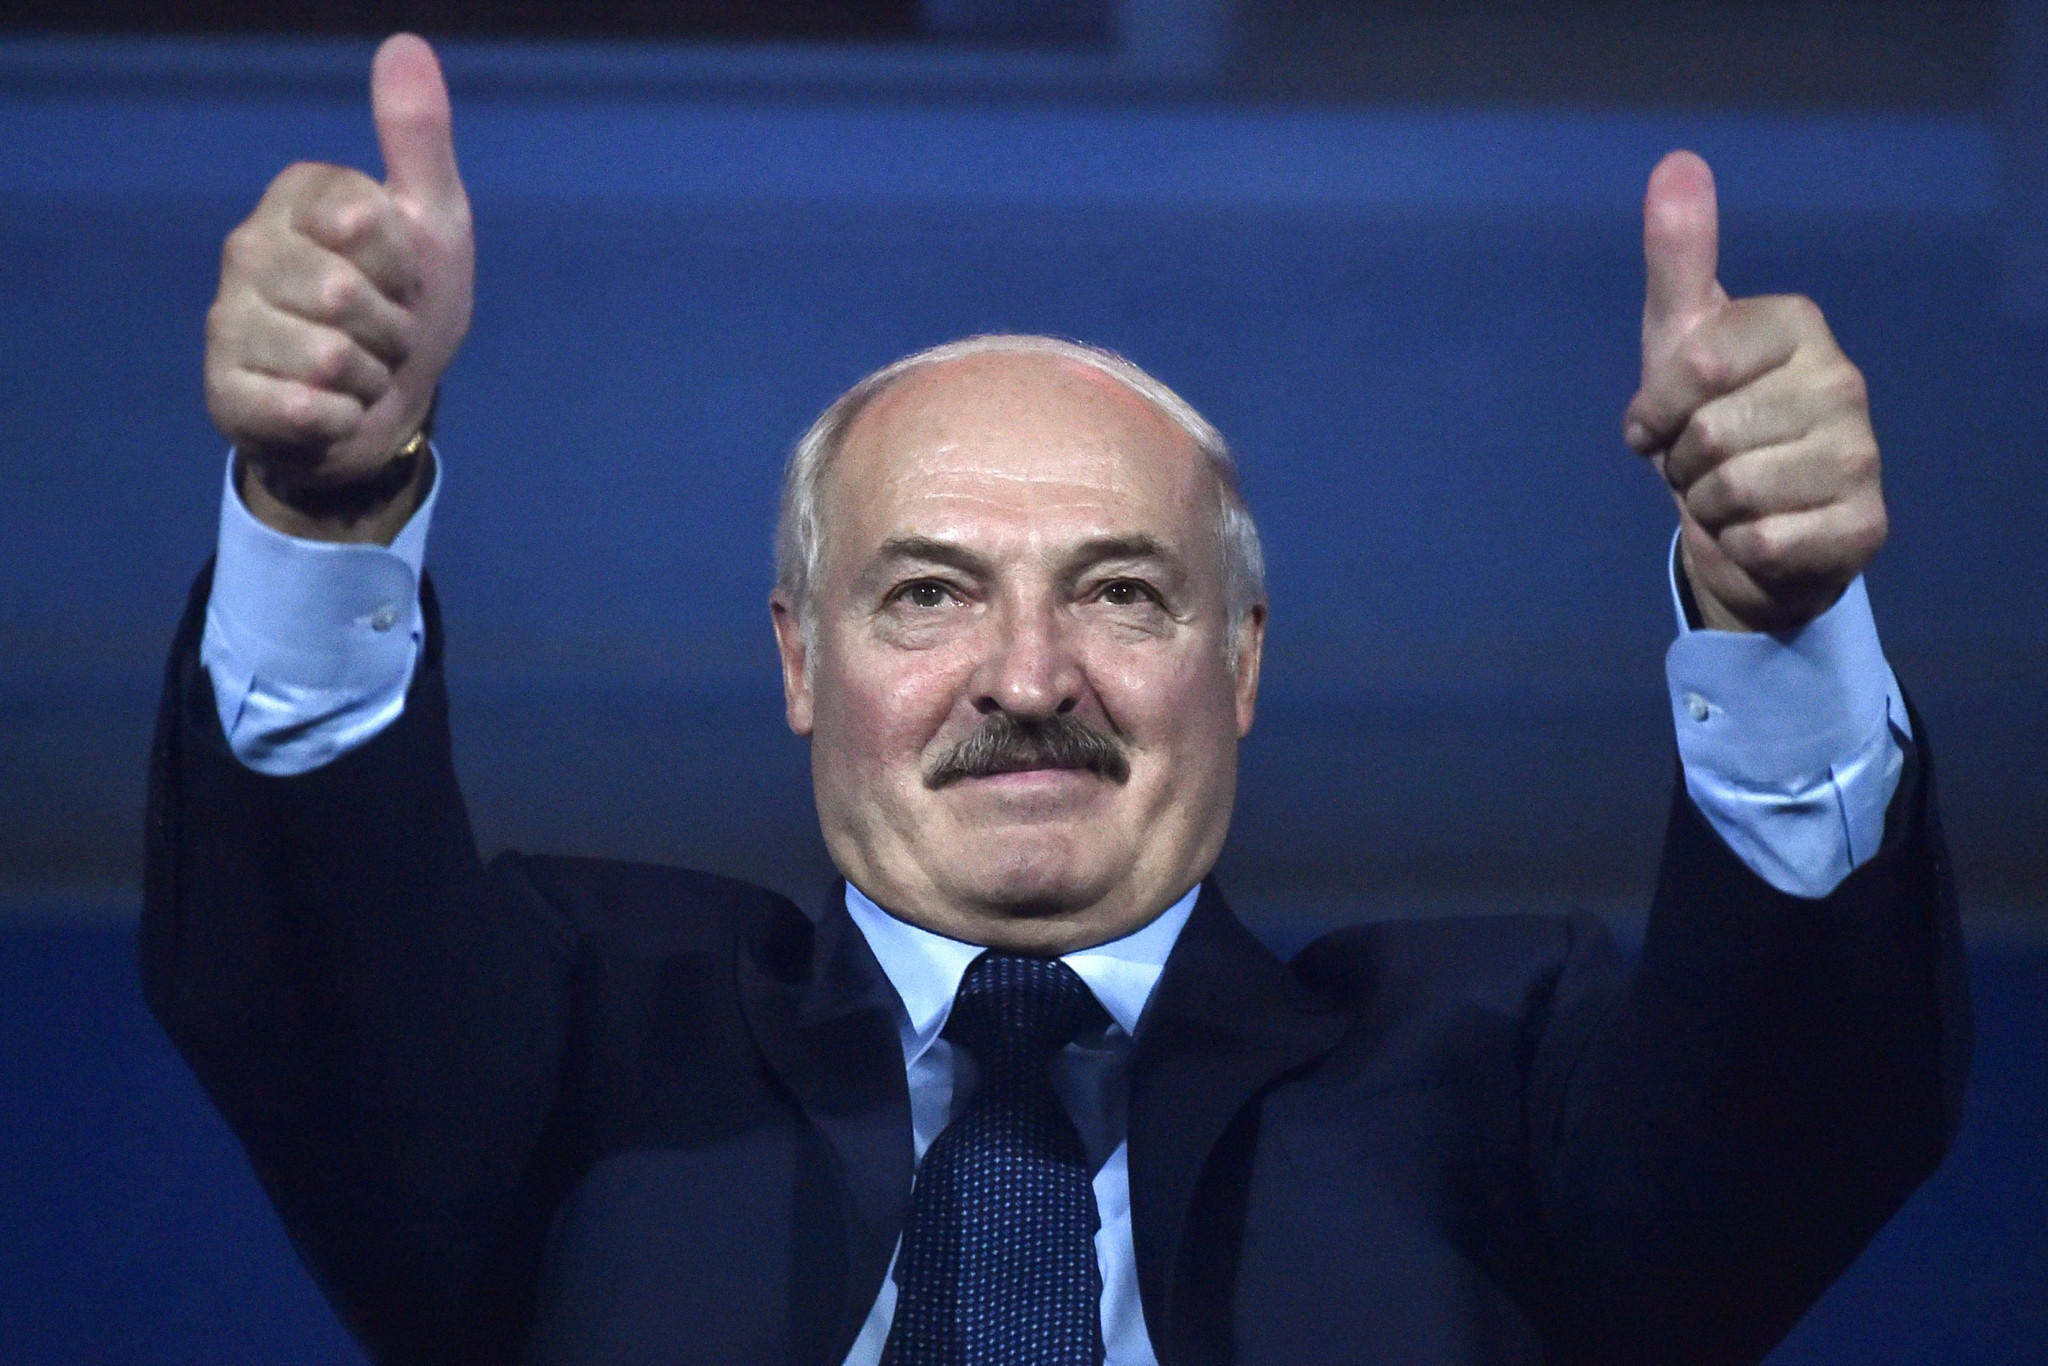 The use of the death penalty in Belarus and clampdowns on press freedoms are key criticisms of the regime of President Alexander Lukashenko, despite the country staging a successful European Games ©Getty Images